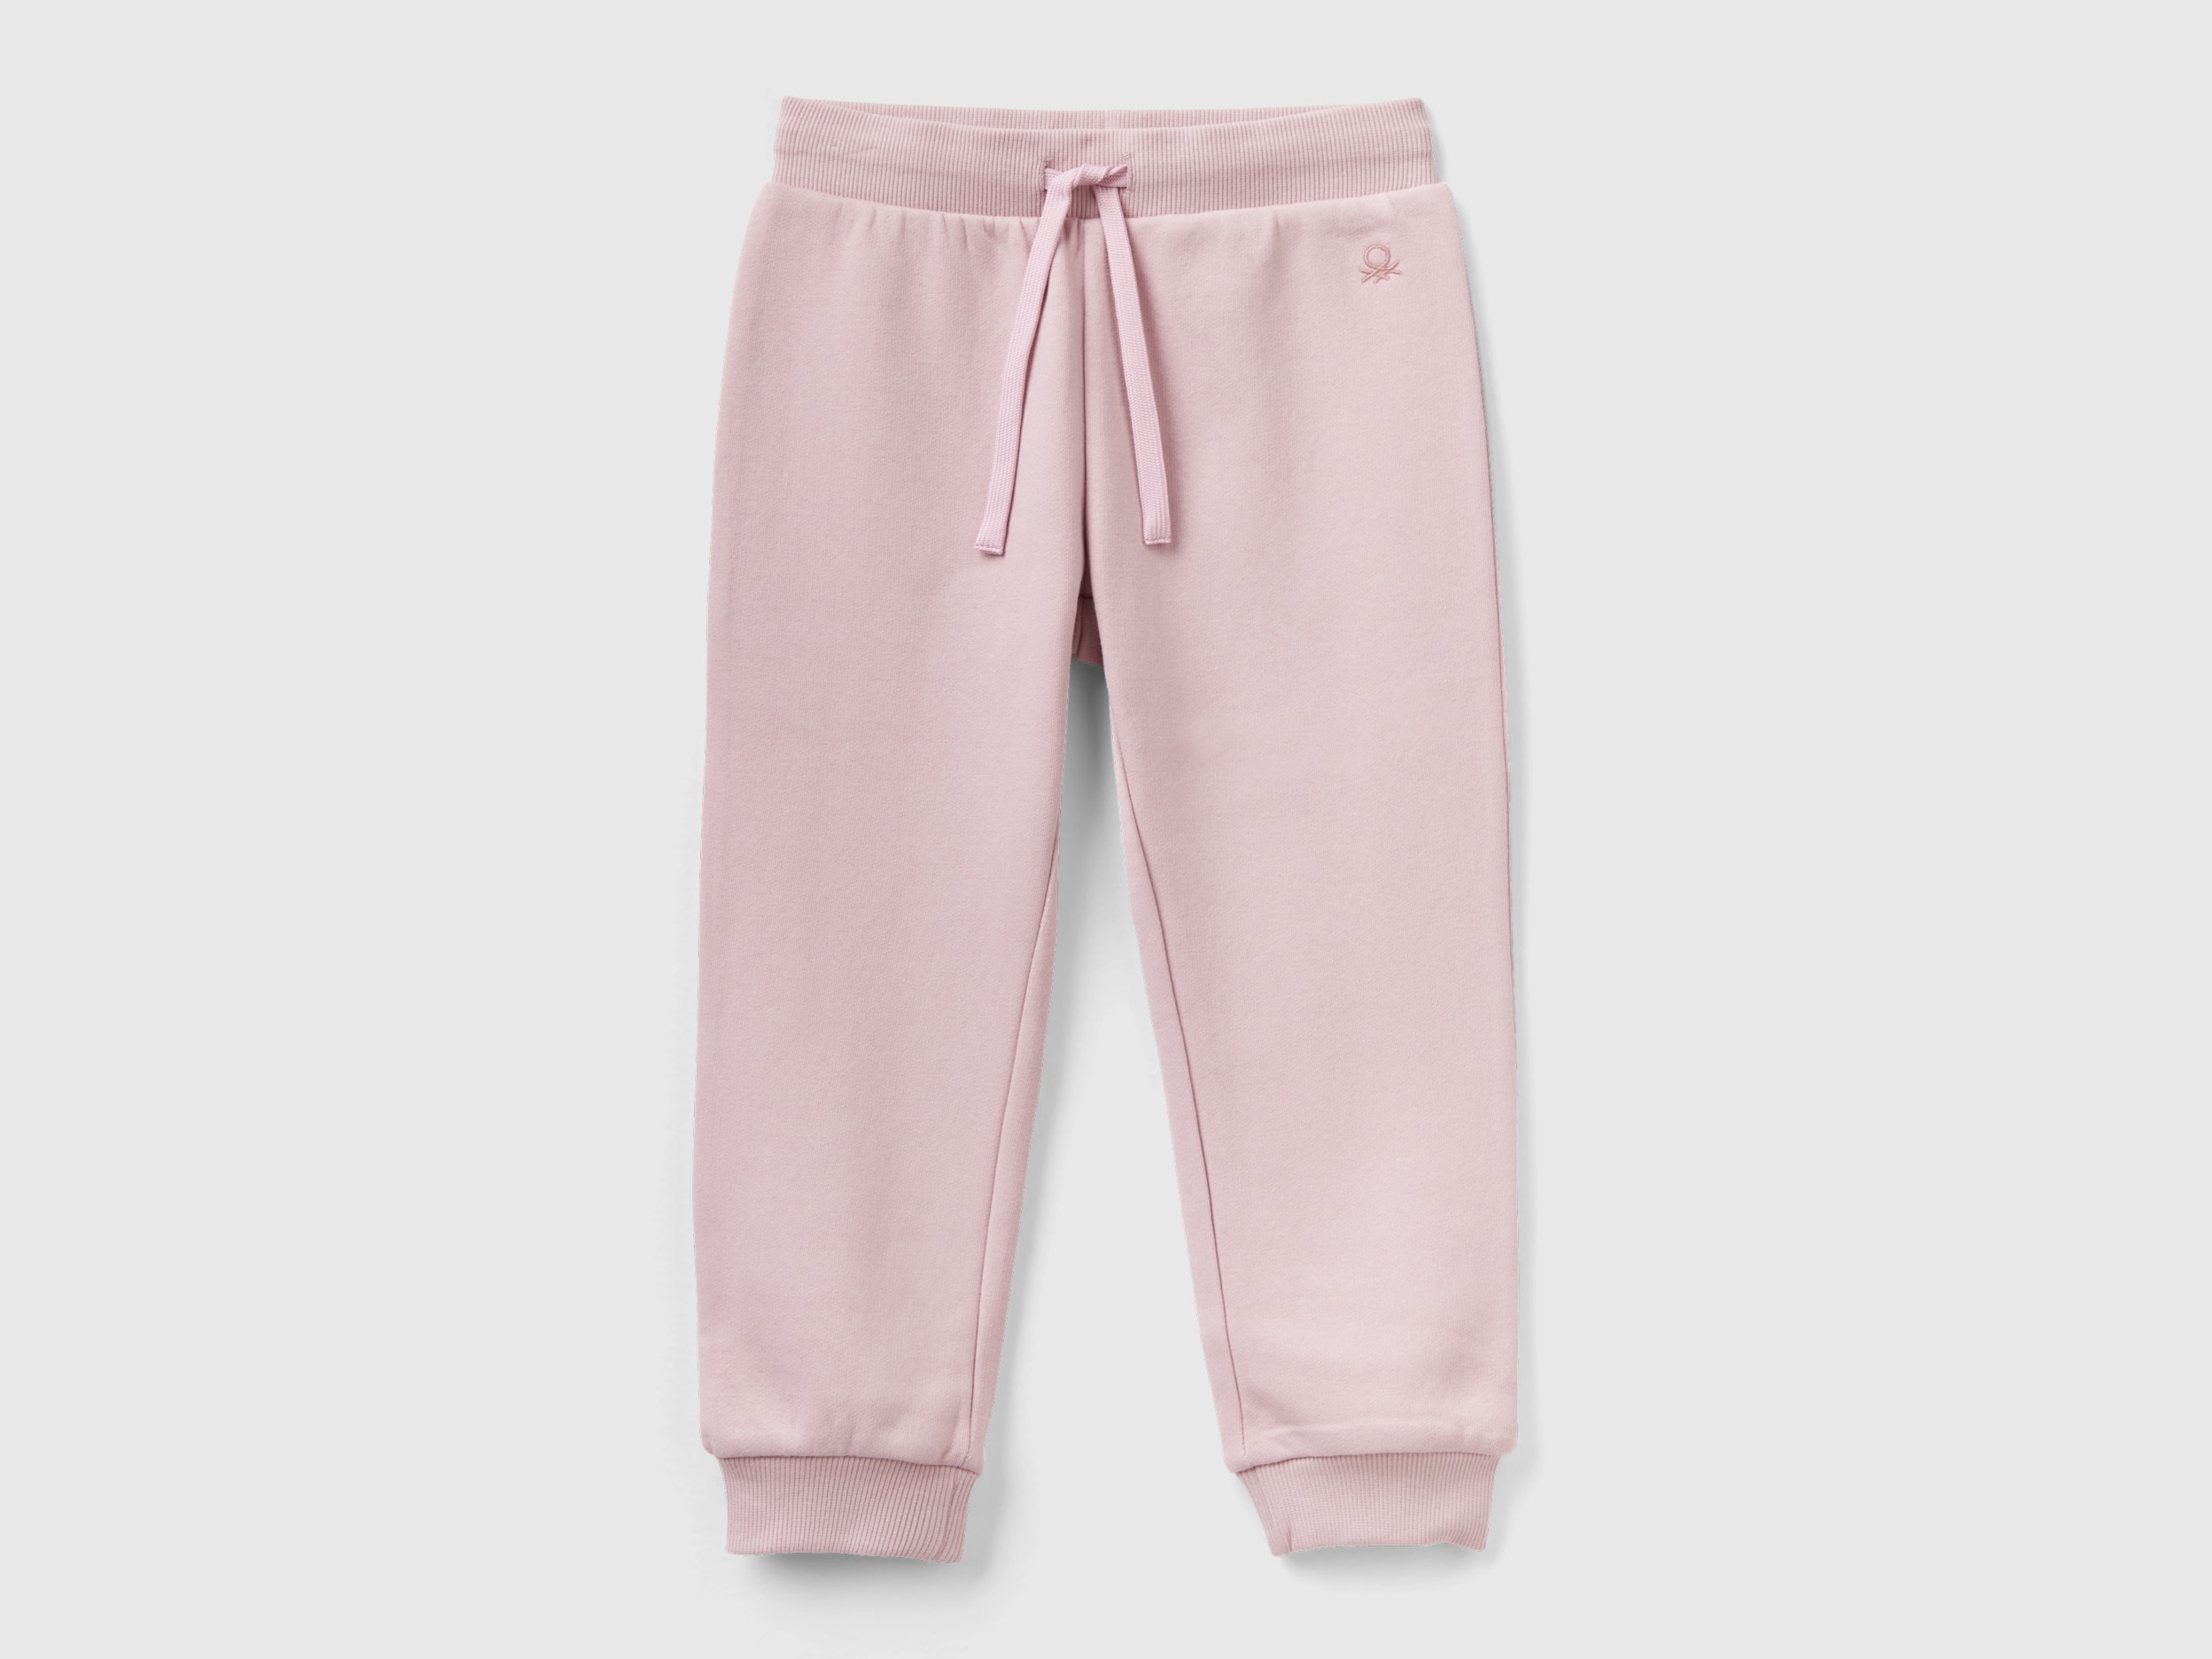 Benetton, Sweat Joggers With Drawstring, size 5-6, Pink, Kids